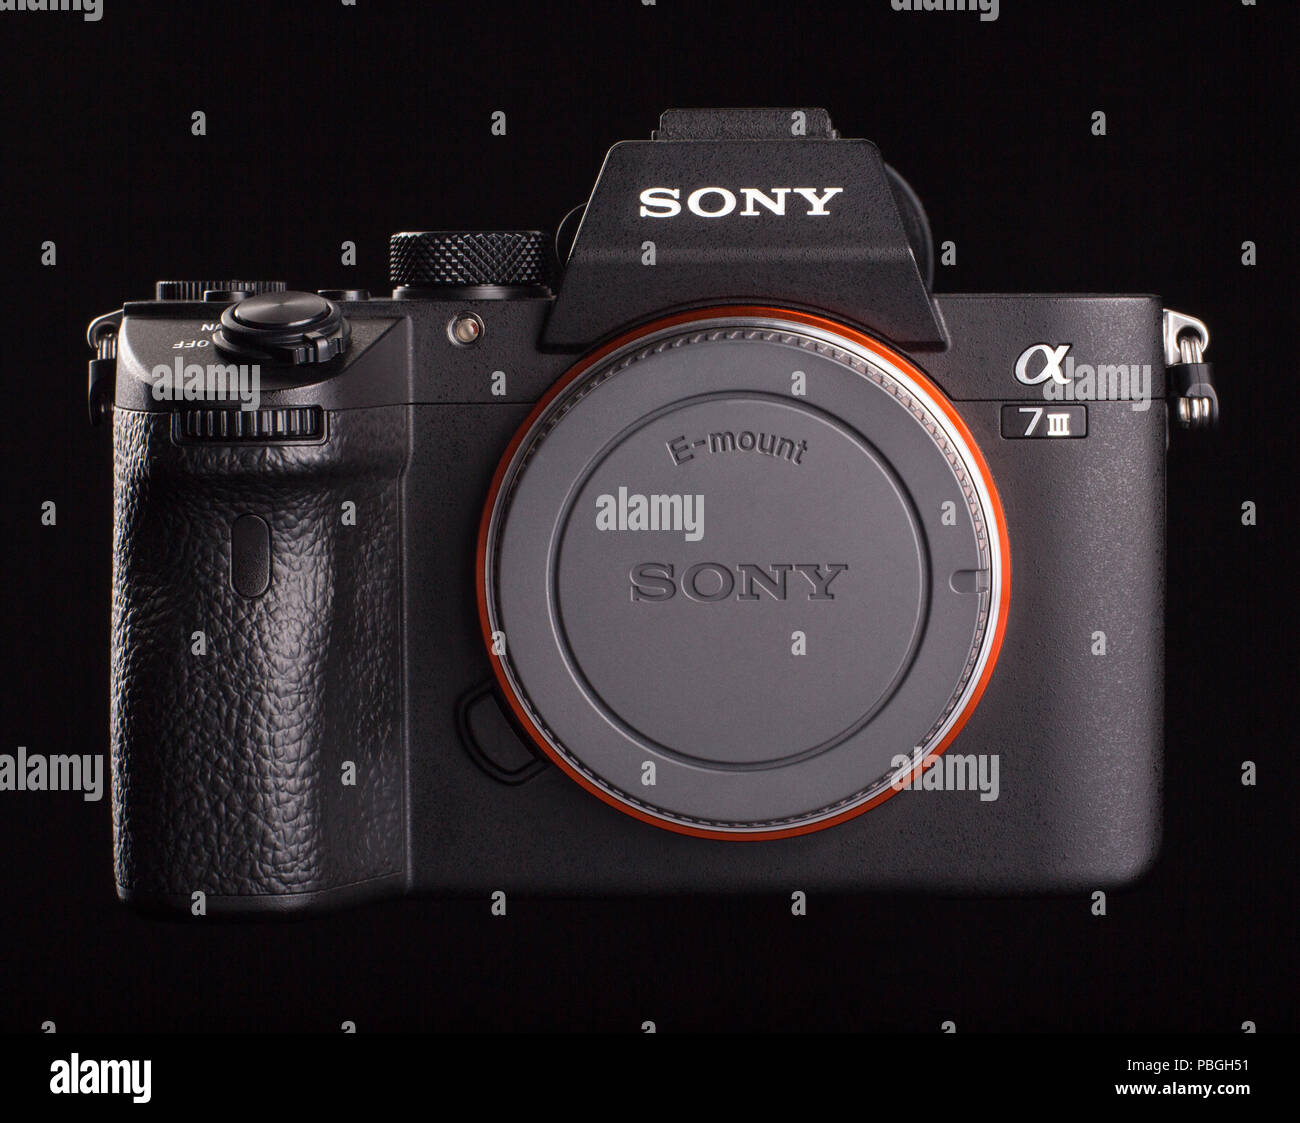 802 Sony A7iii Images, Stock Photos, 3D objects, & Vectors